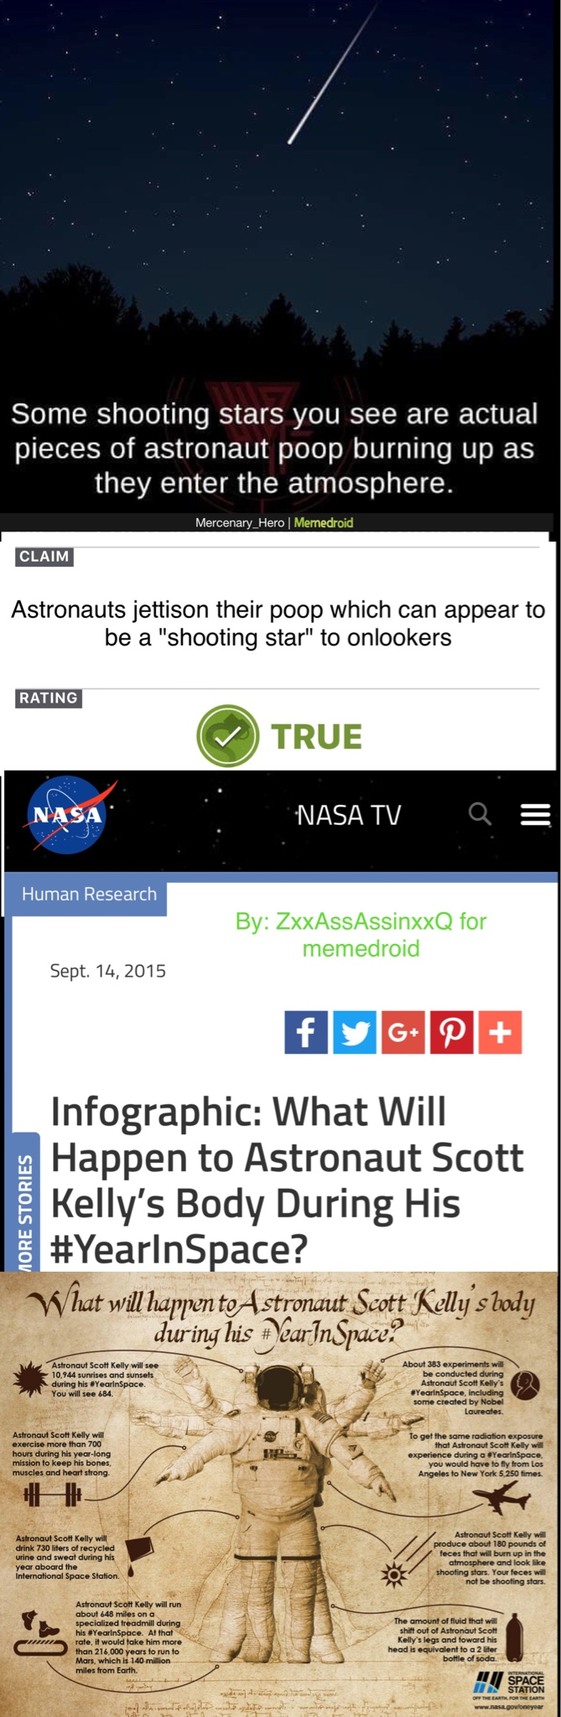 link to NASA report in description, it's just the info graphic though - meme